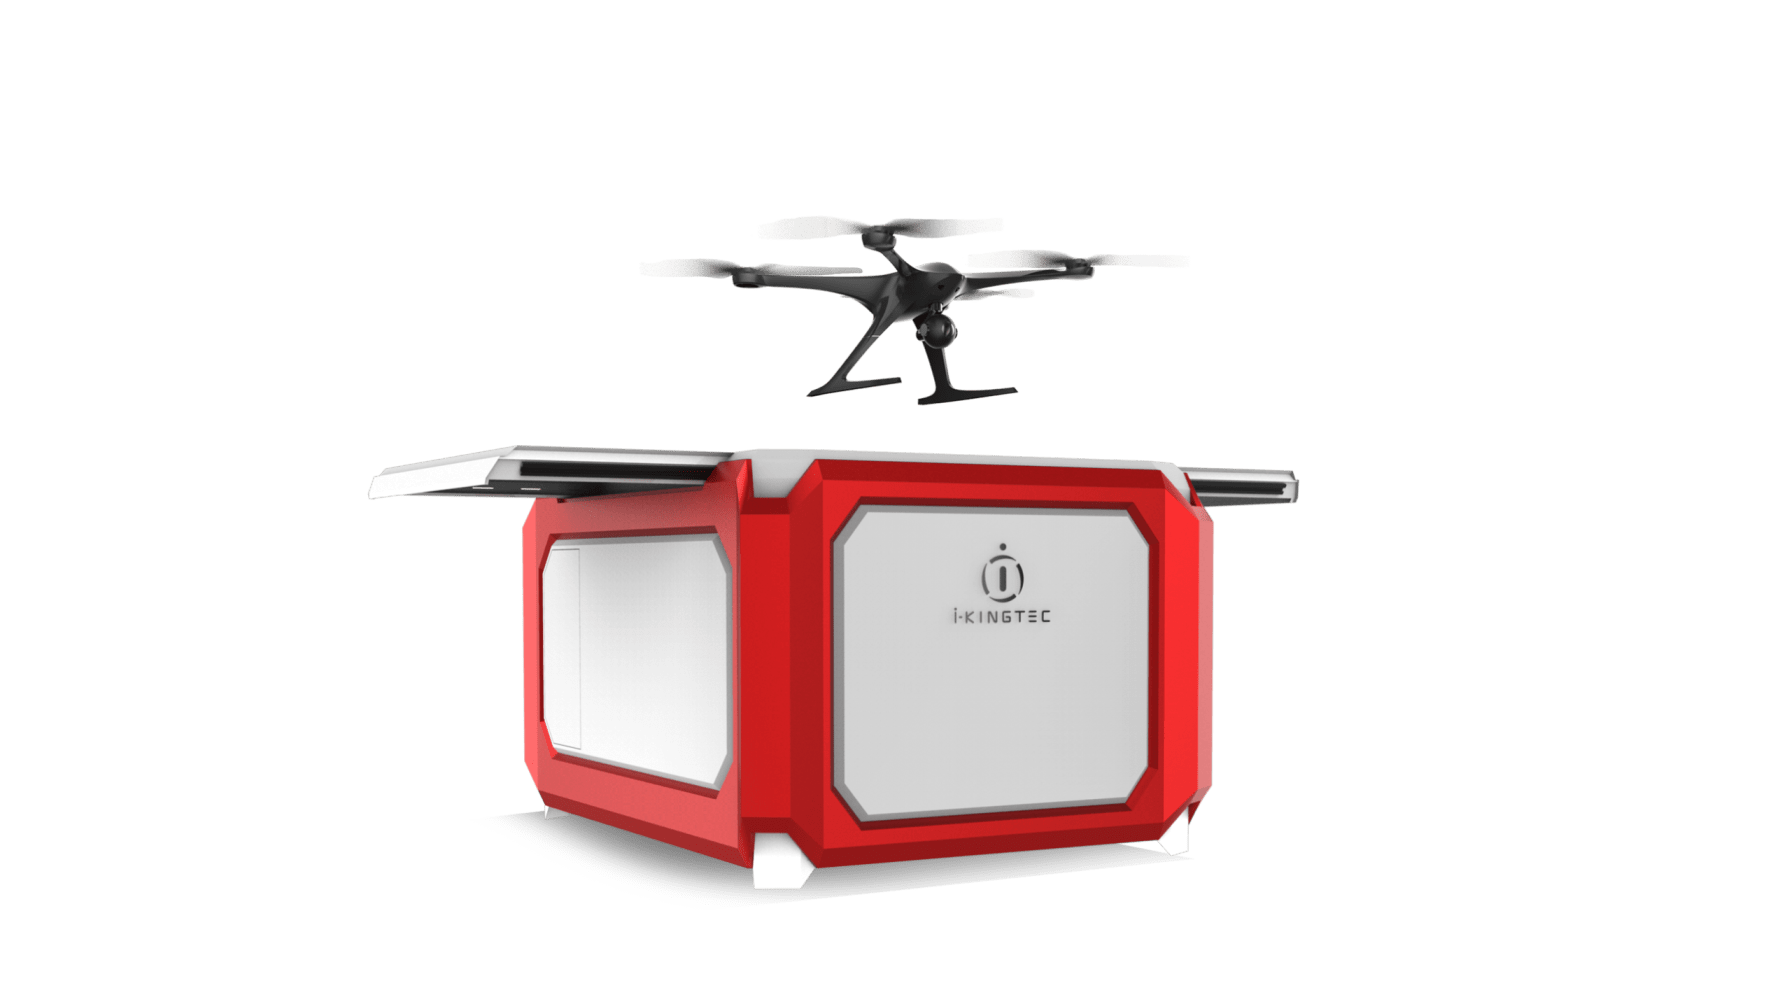 China Digest: Drone maker i-KINGTECH, Silicon Integrated secure Series B funding